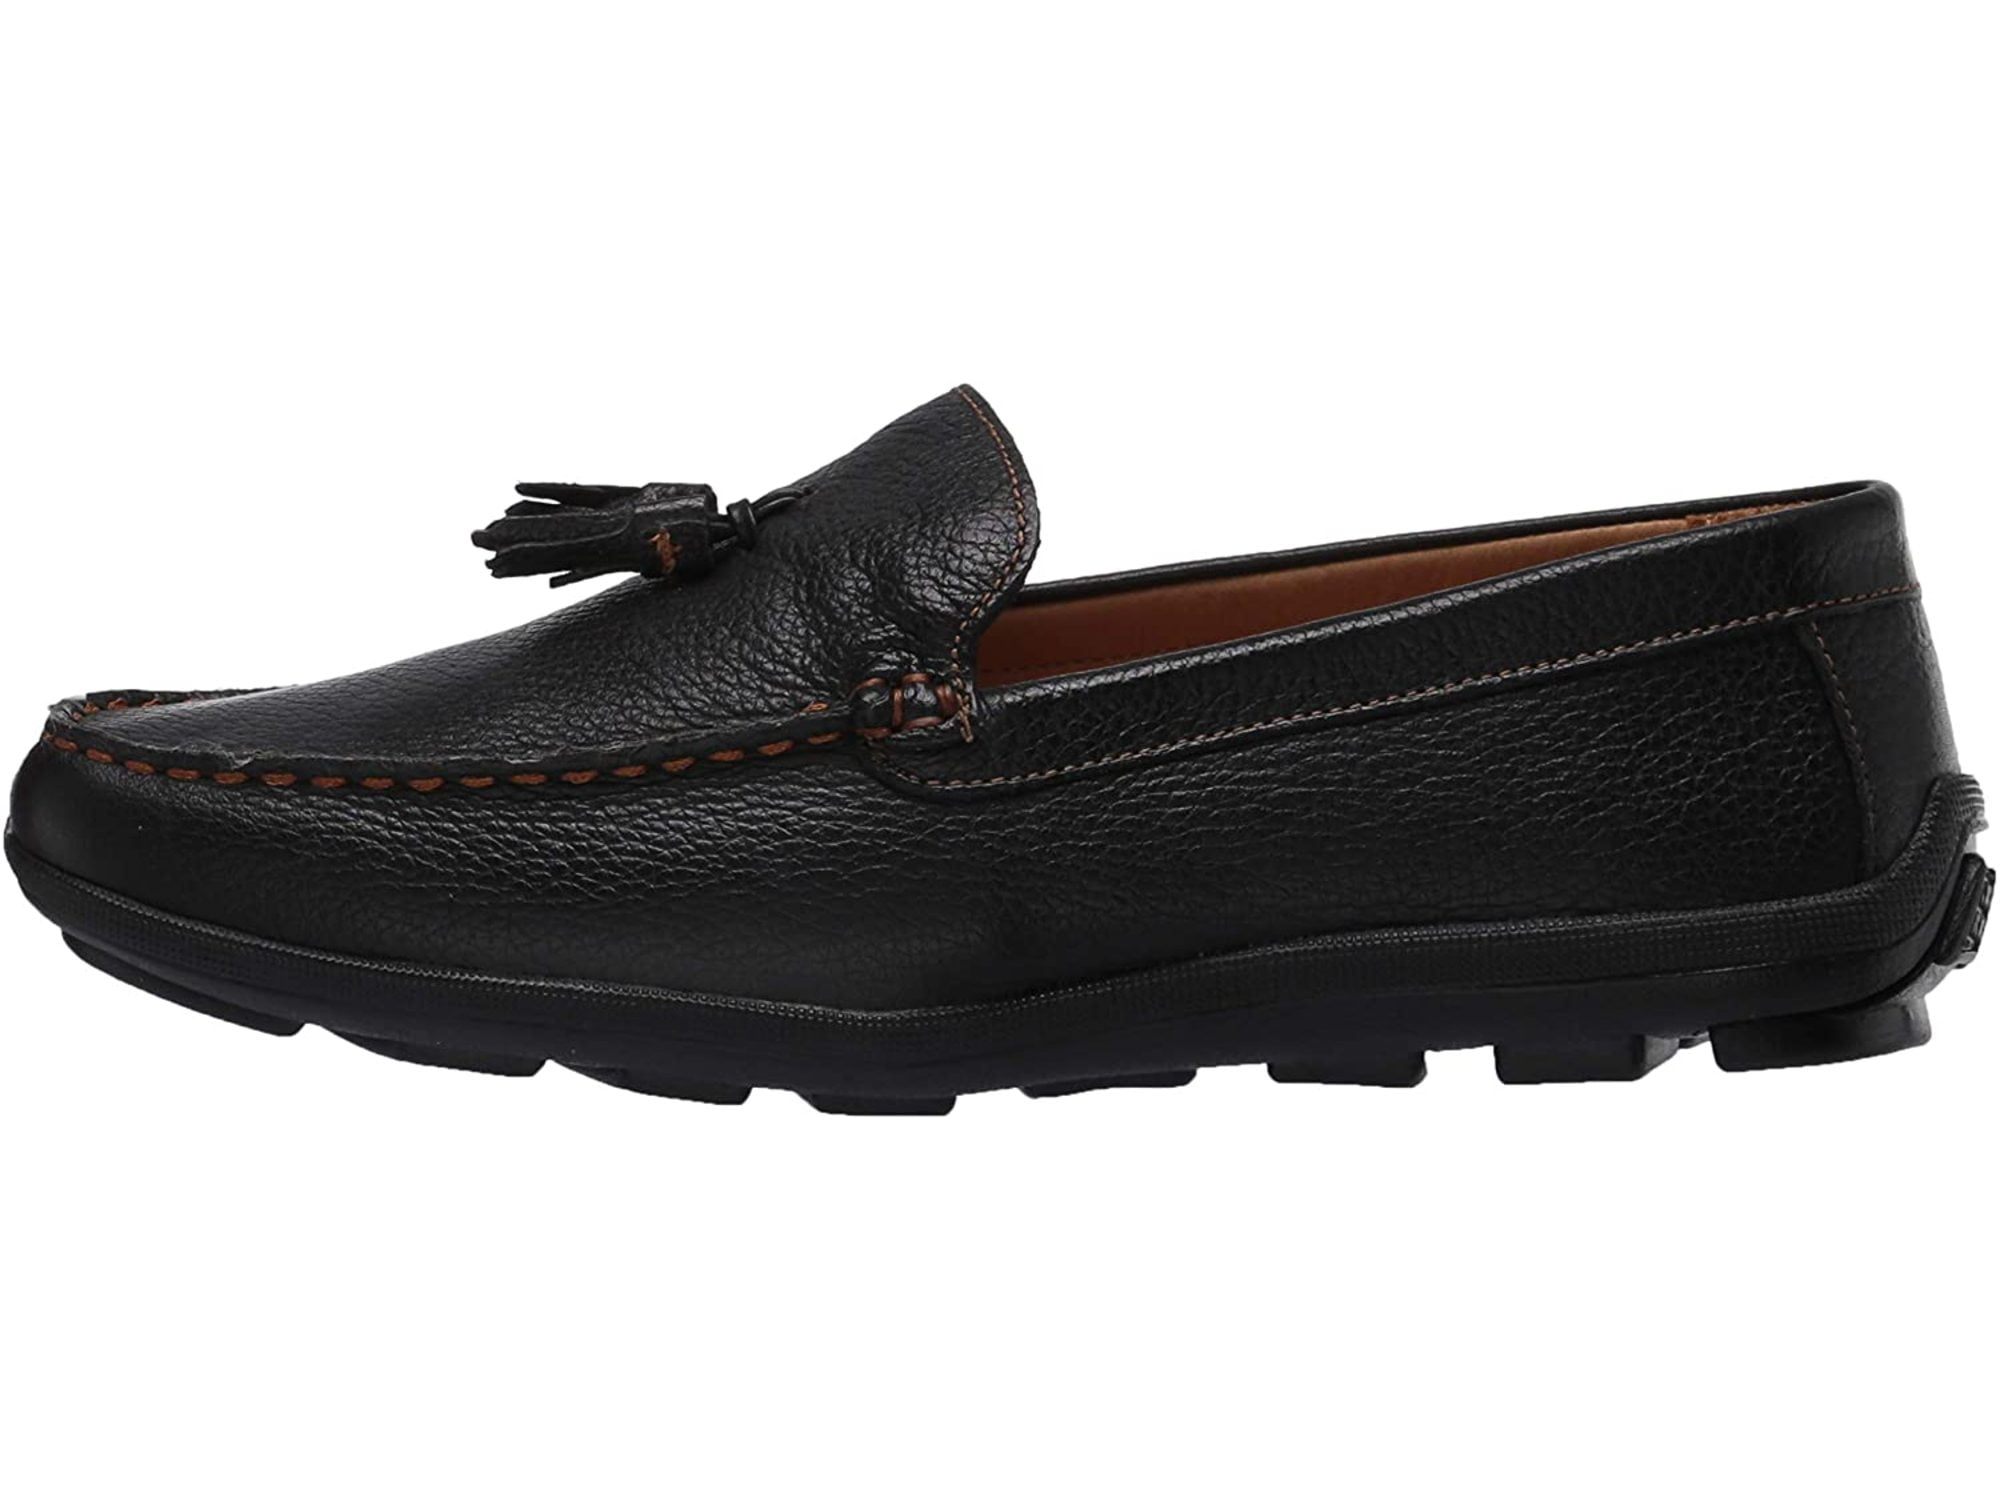 Driver Club USA Unisex-Child Kids Boys/Girls Leather Driving Loafer with Tassle Detail 